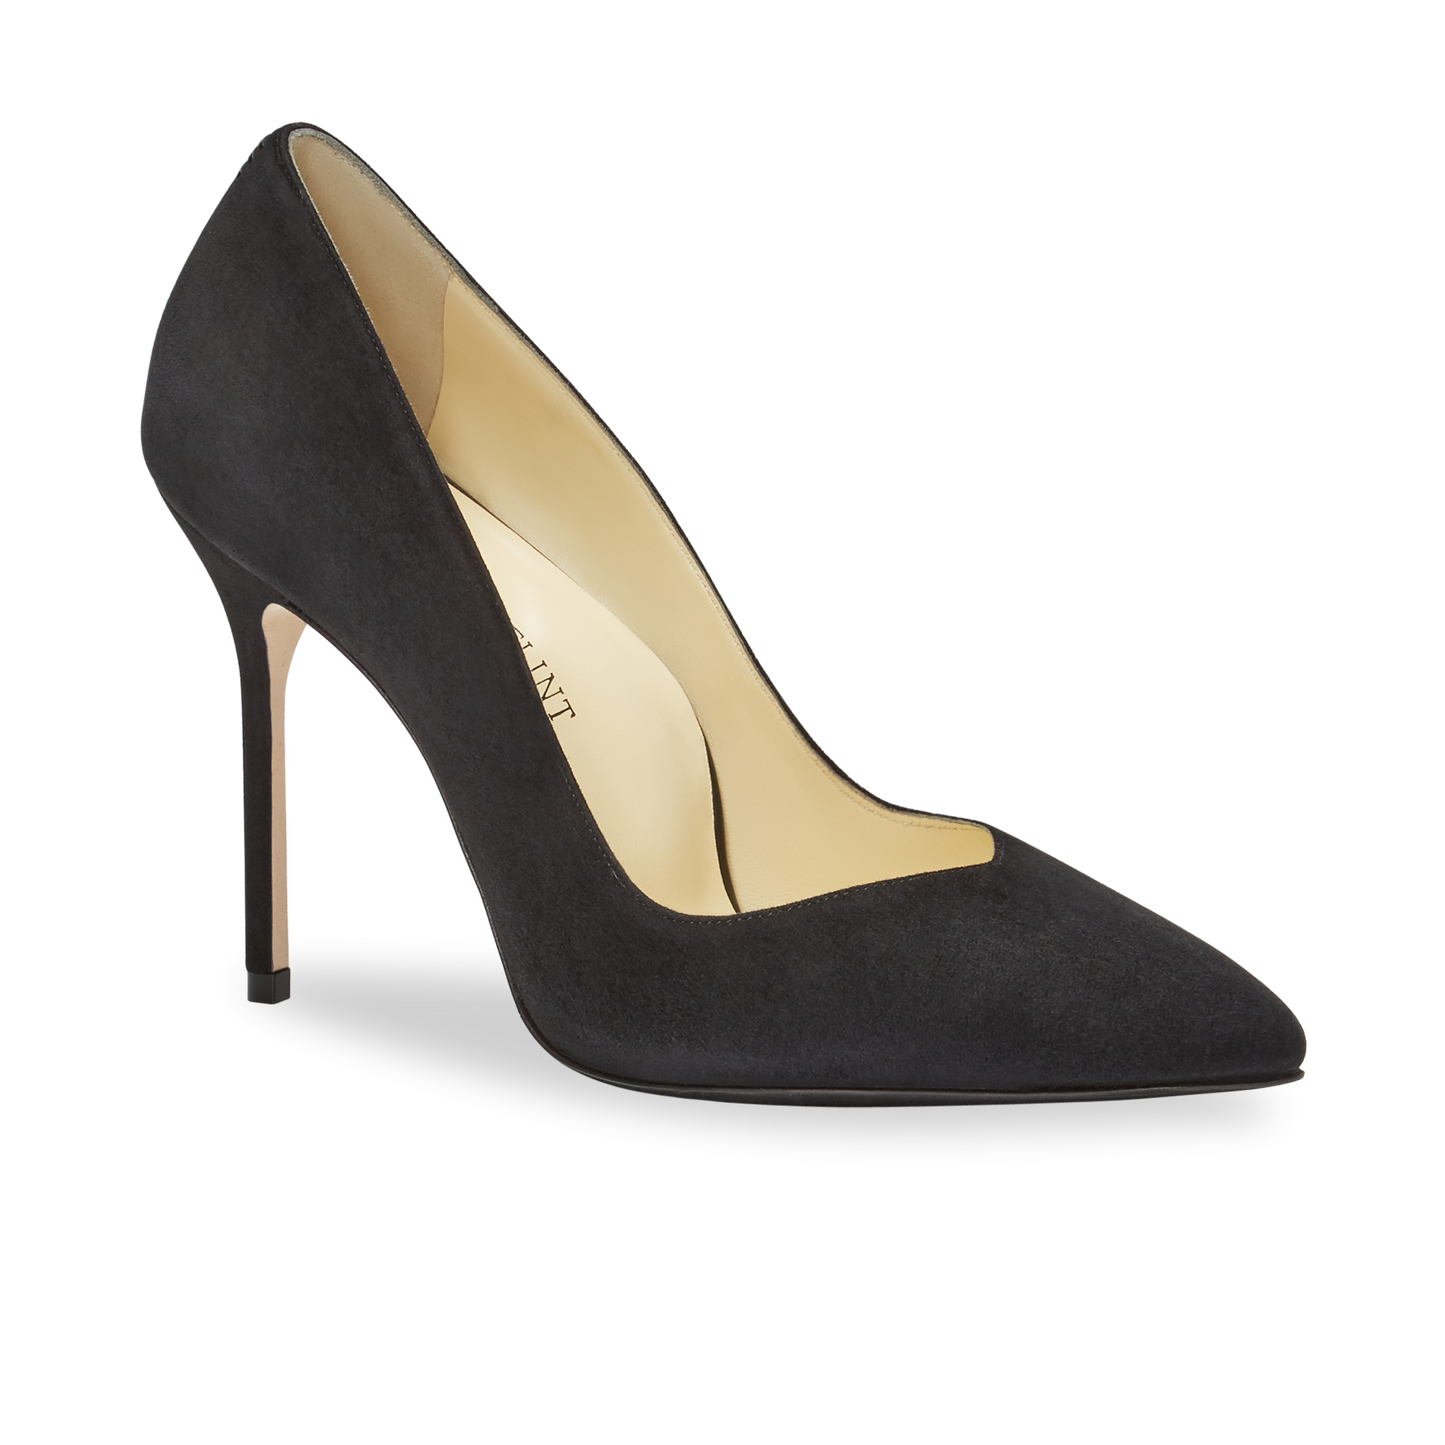 100m Italian Made Pointed Toe Pump in Black Suede